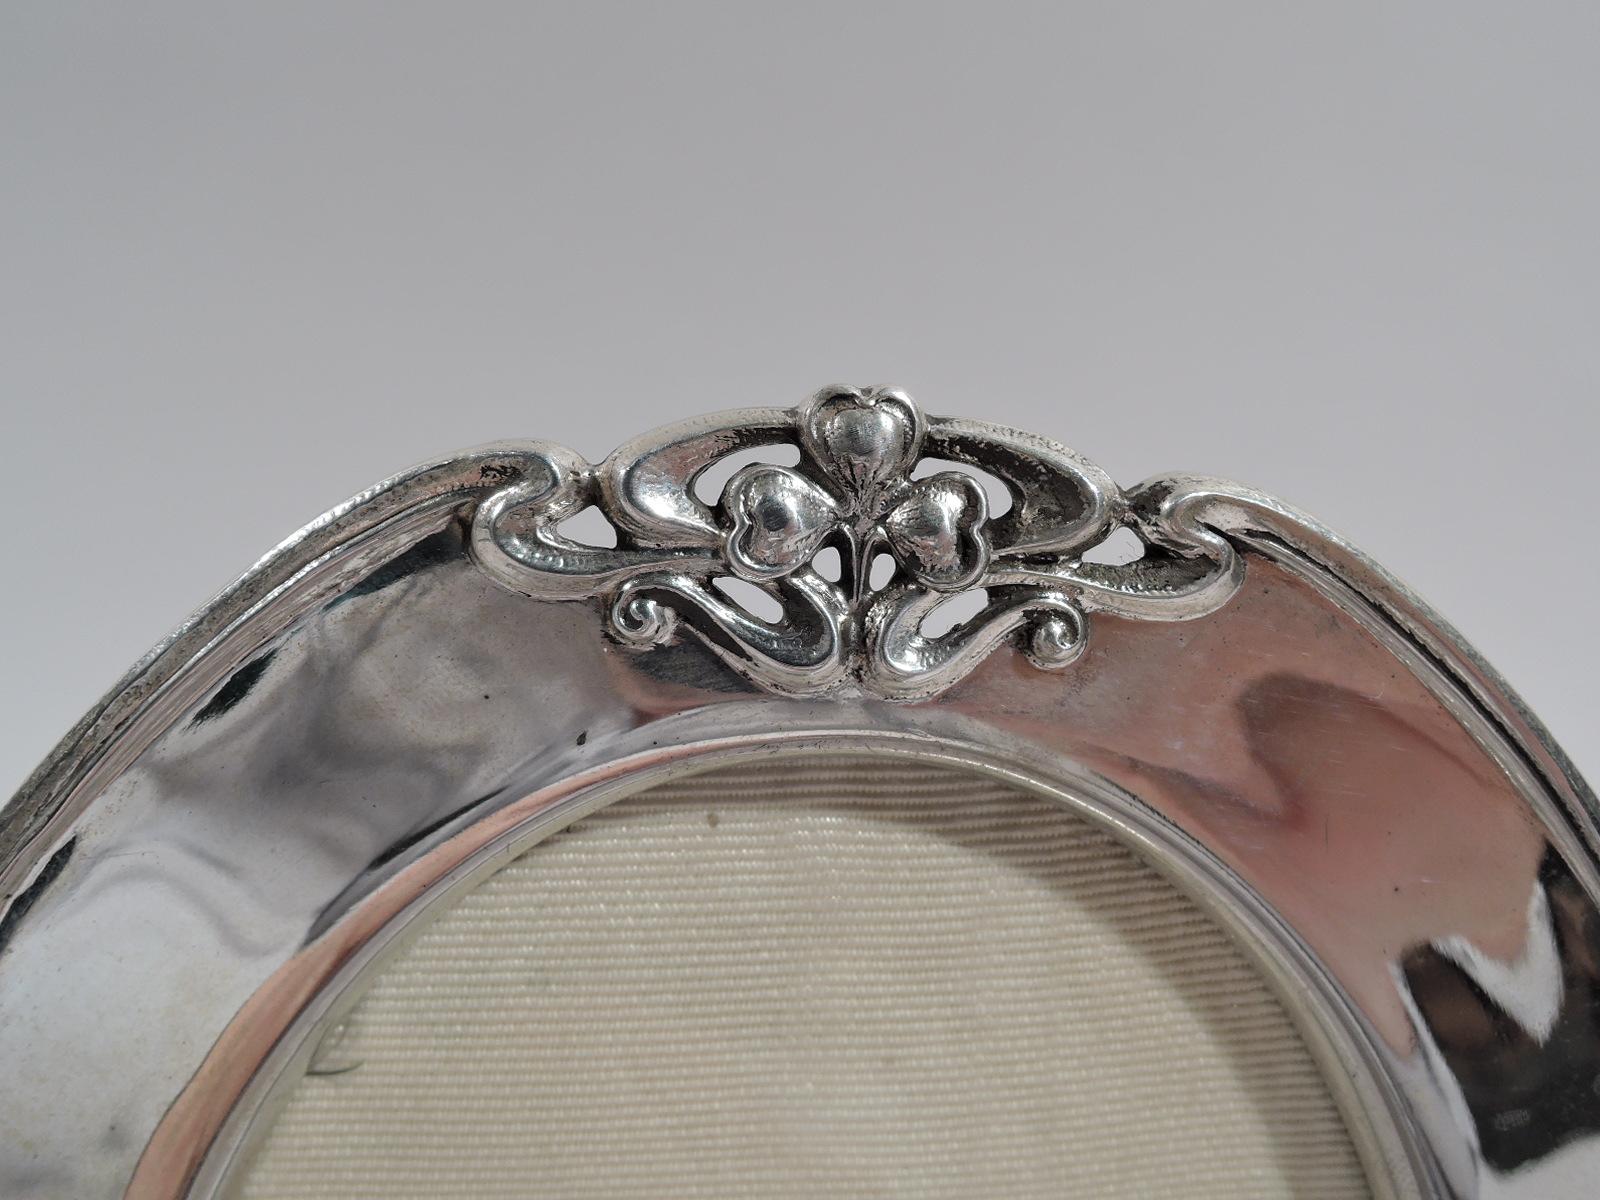 Turn-of-the-century Art Nouveau sterling silver picture frame. Made by Shreve & Co. in San Francisco. Oval window in flat surround; rim molded and interspersed with inset trefoils and whiplash scrolls. With glass, silk lining, and hinged wire